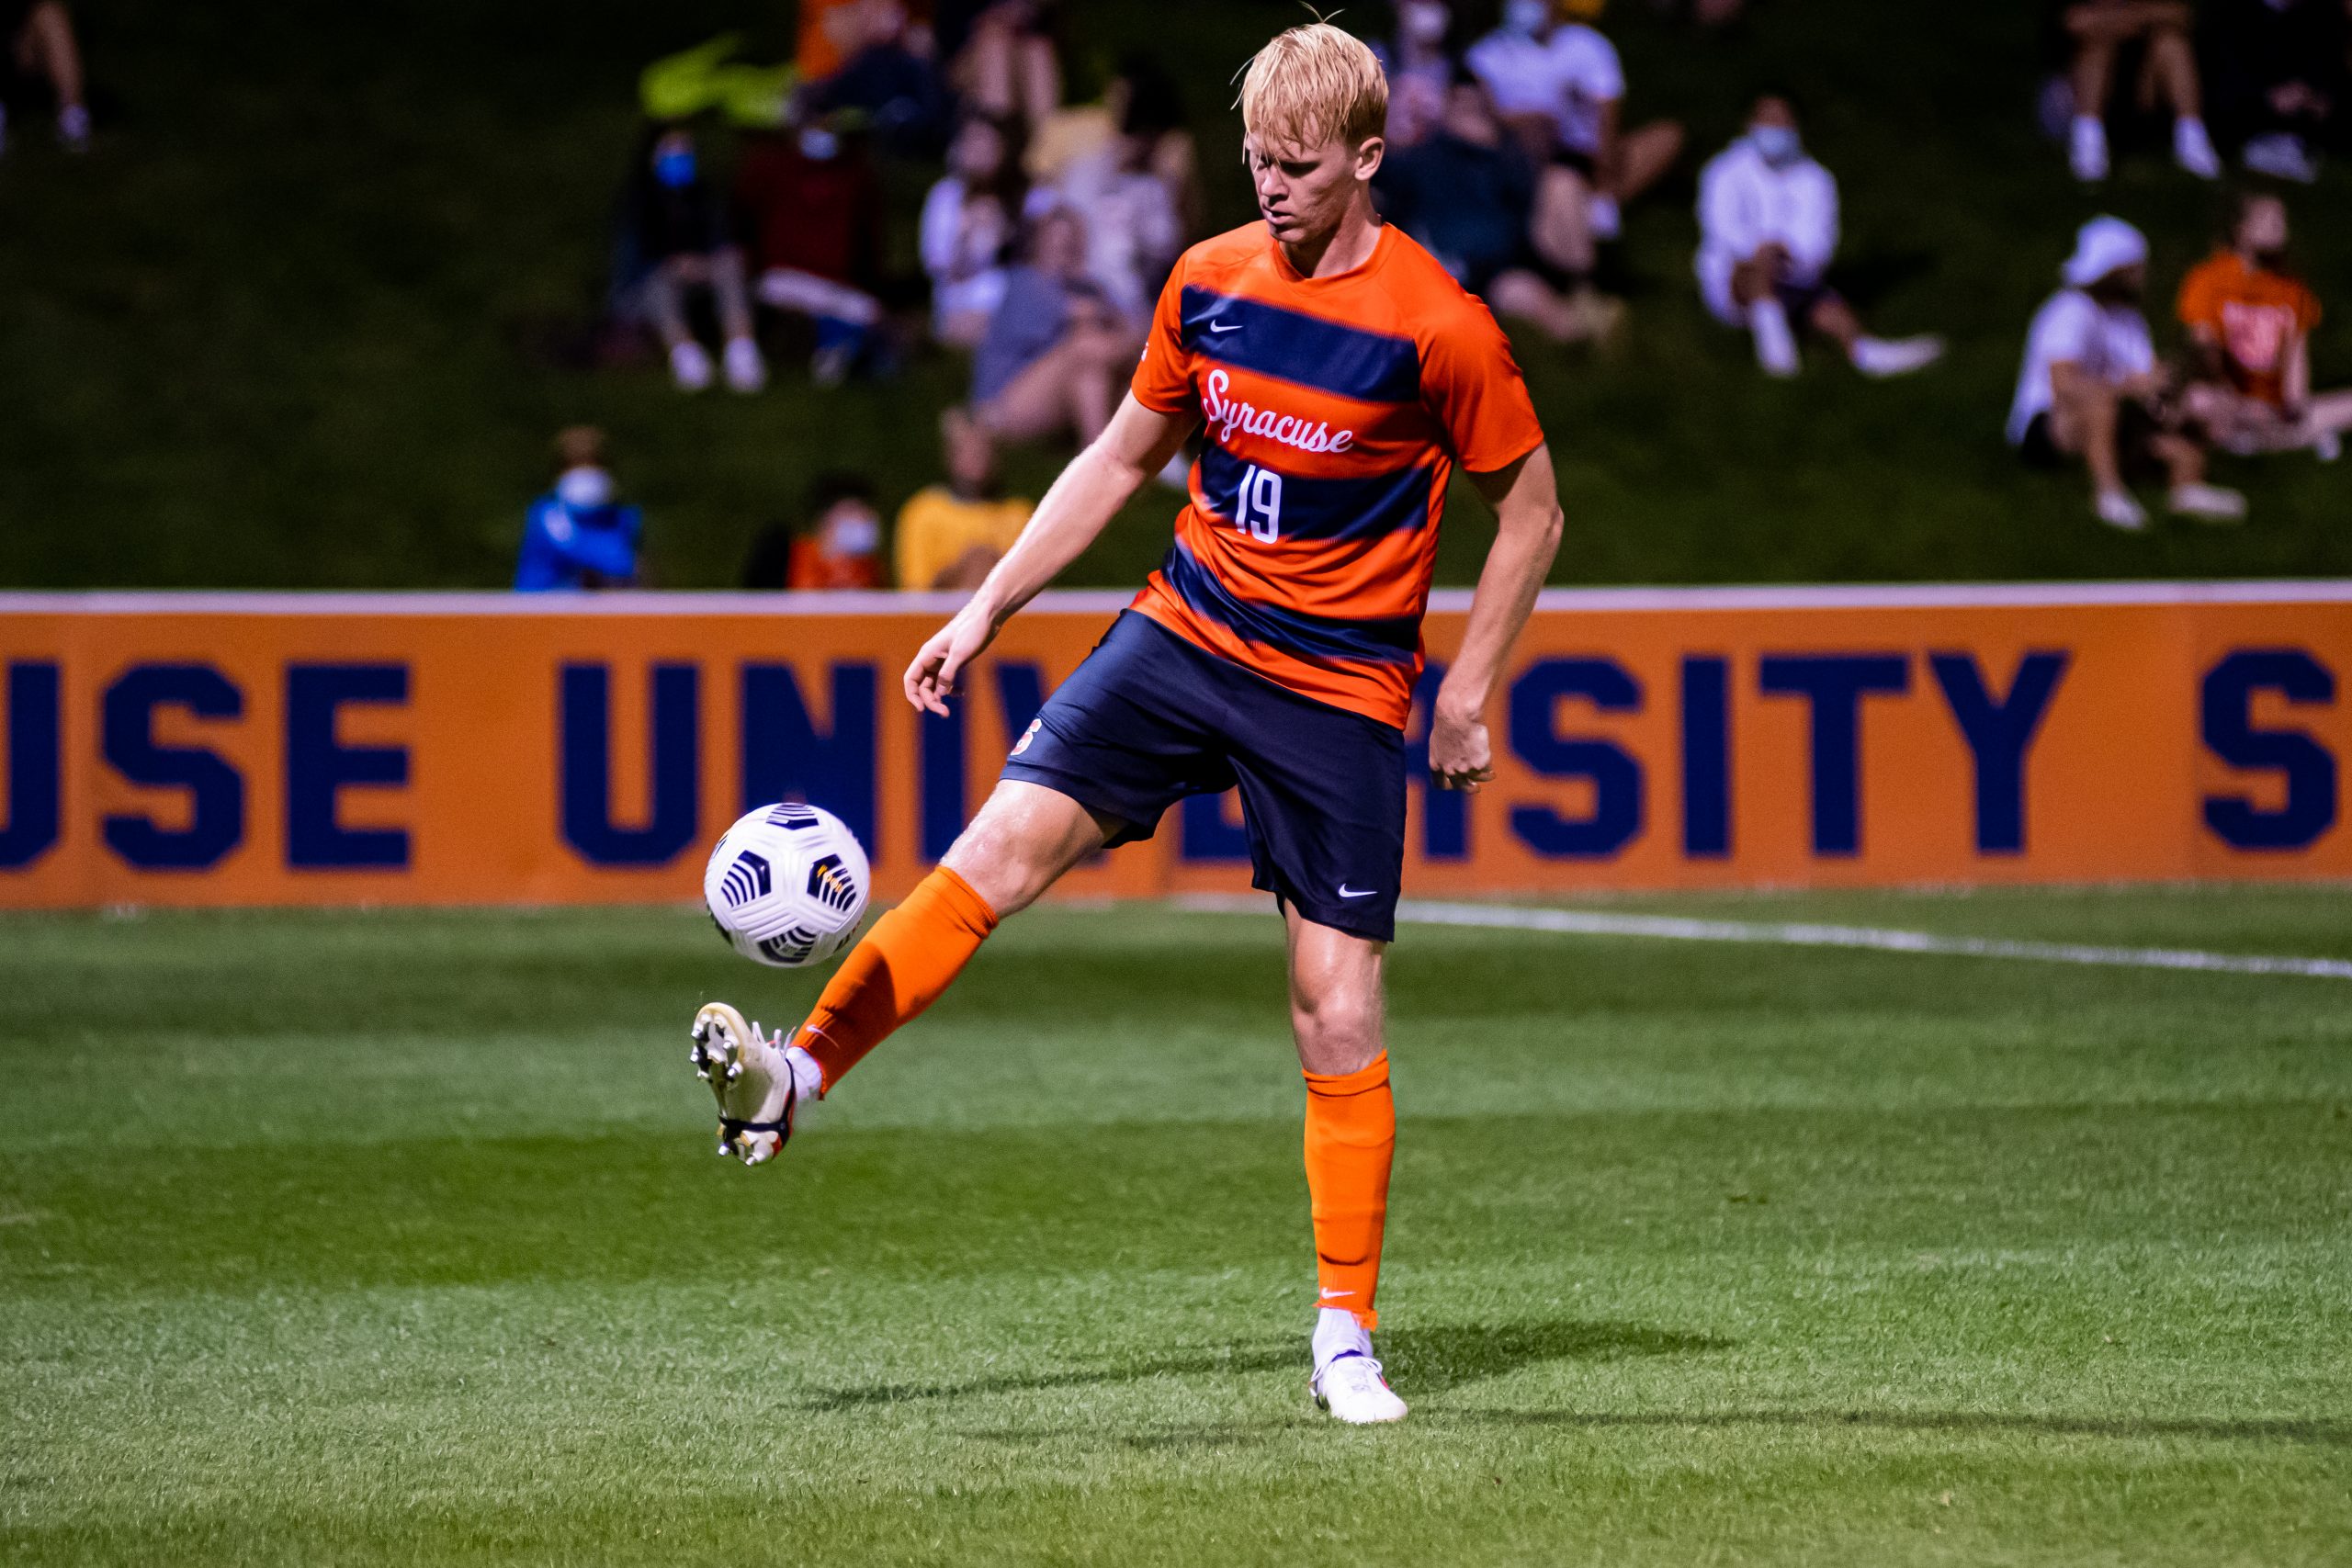 Syracuse's Buster Sjoberg (19) settles down a ball in the midfield during a men's Soccer vs. Louisville Cardinals on Sept. 17, 2021 at SU Soccer Stadium.